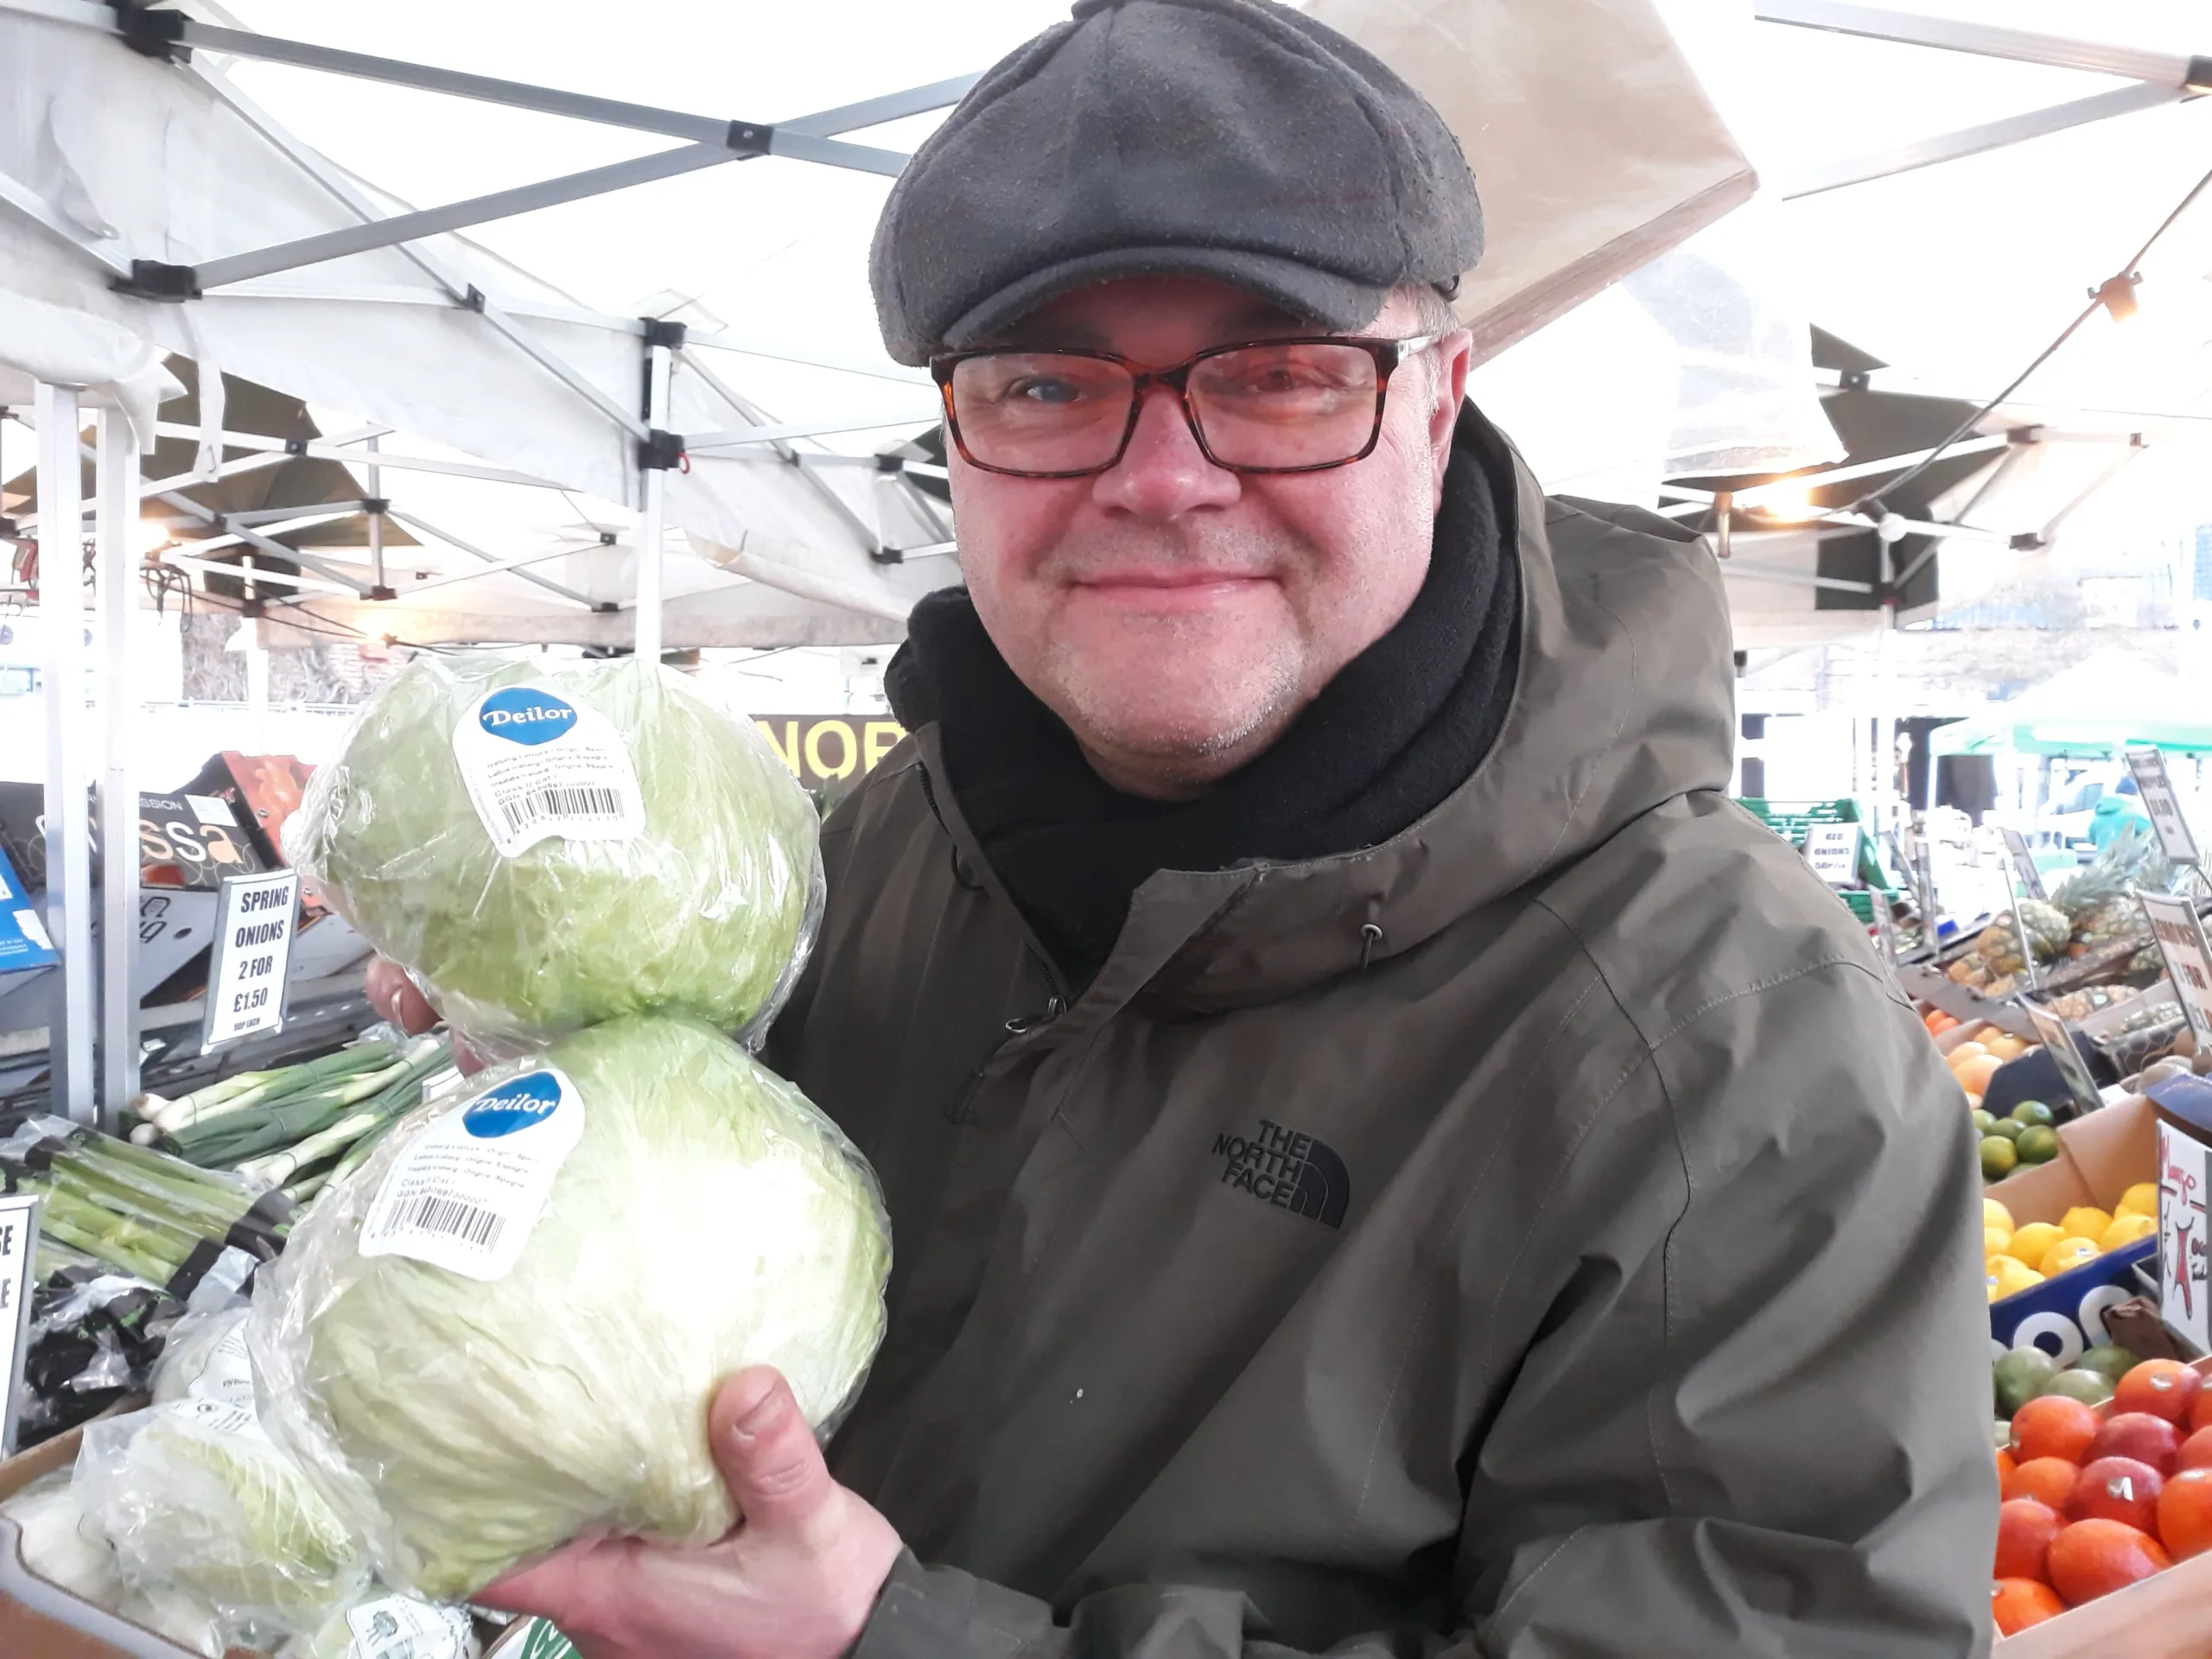 Lee Martin: “The shortage is only with the supermarkets simply because they don’t want to pay a fair price to the growers.” PHOTO: Swaffham Market Superintendent